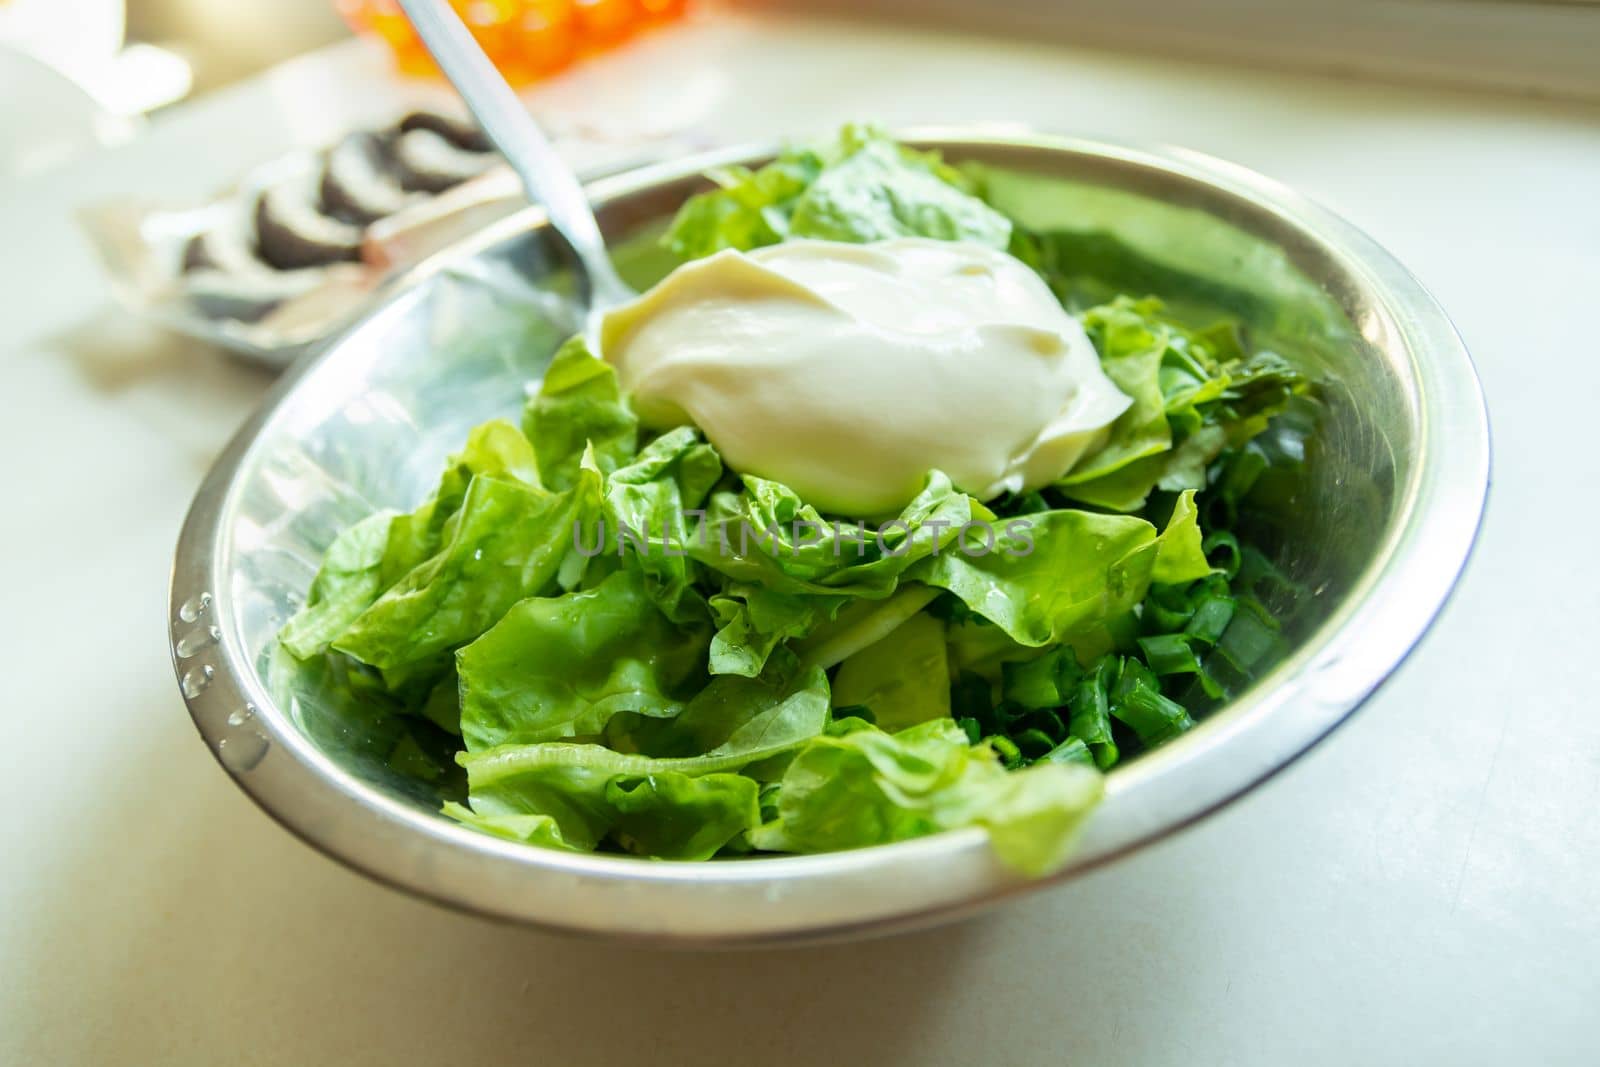 Sour cream on green lettuce in a silver bowl